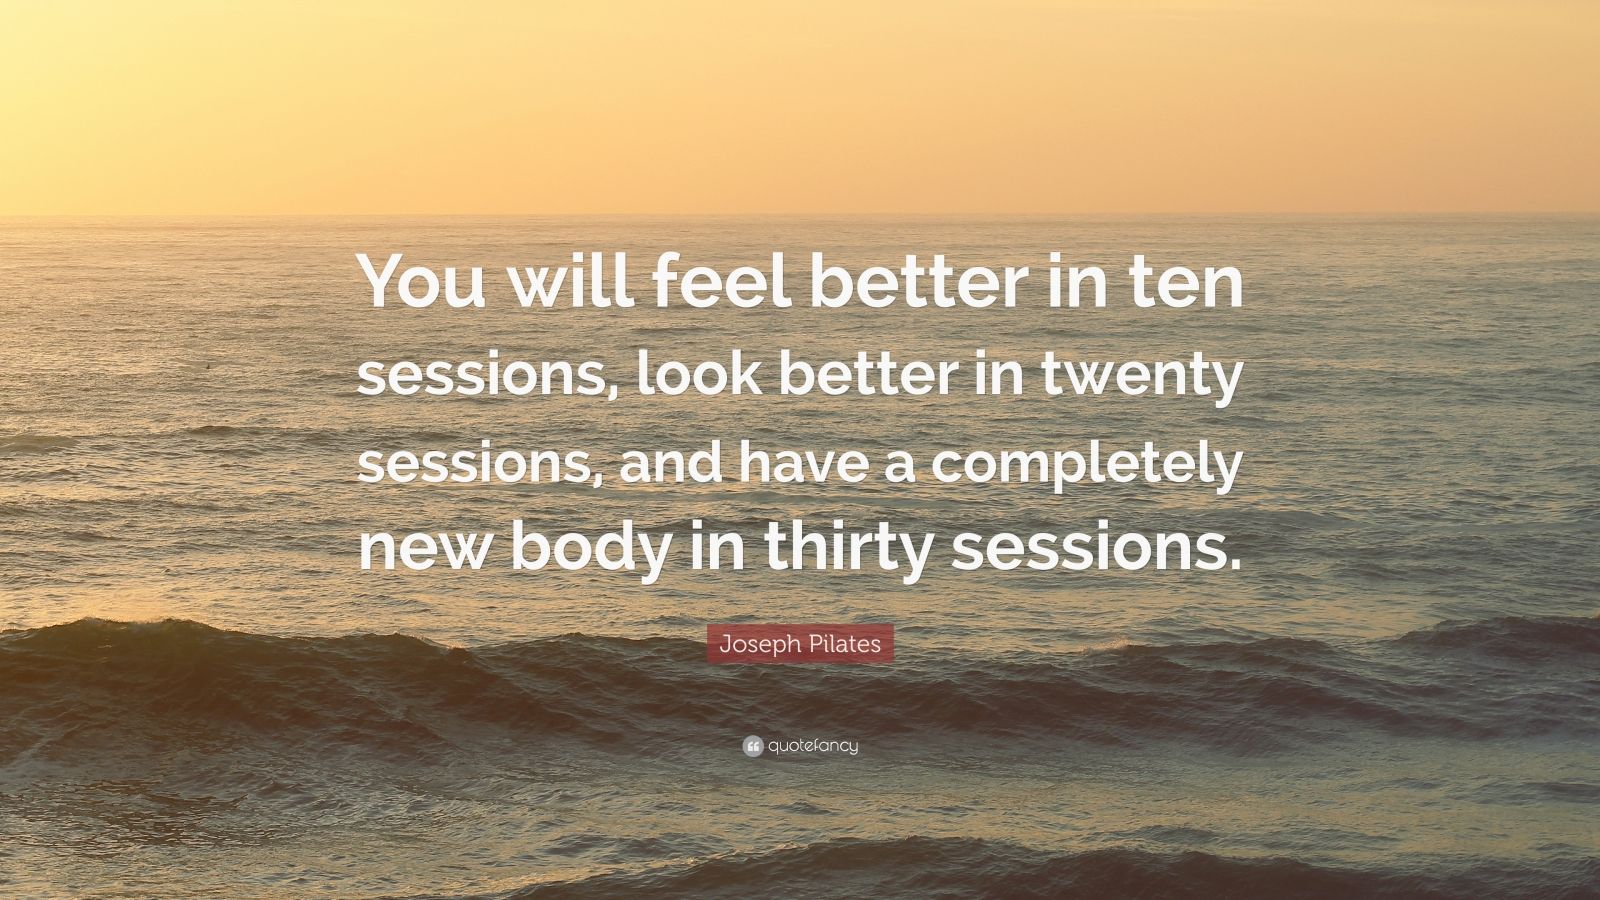 You will feel better in ten sessions, look better in twenty sessions, and  have a completely new body in thirty sessions.” -Joseph Pilates. More than  anything, I feel like I have a